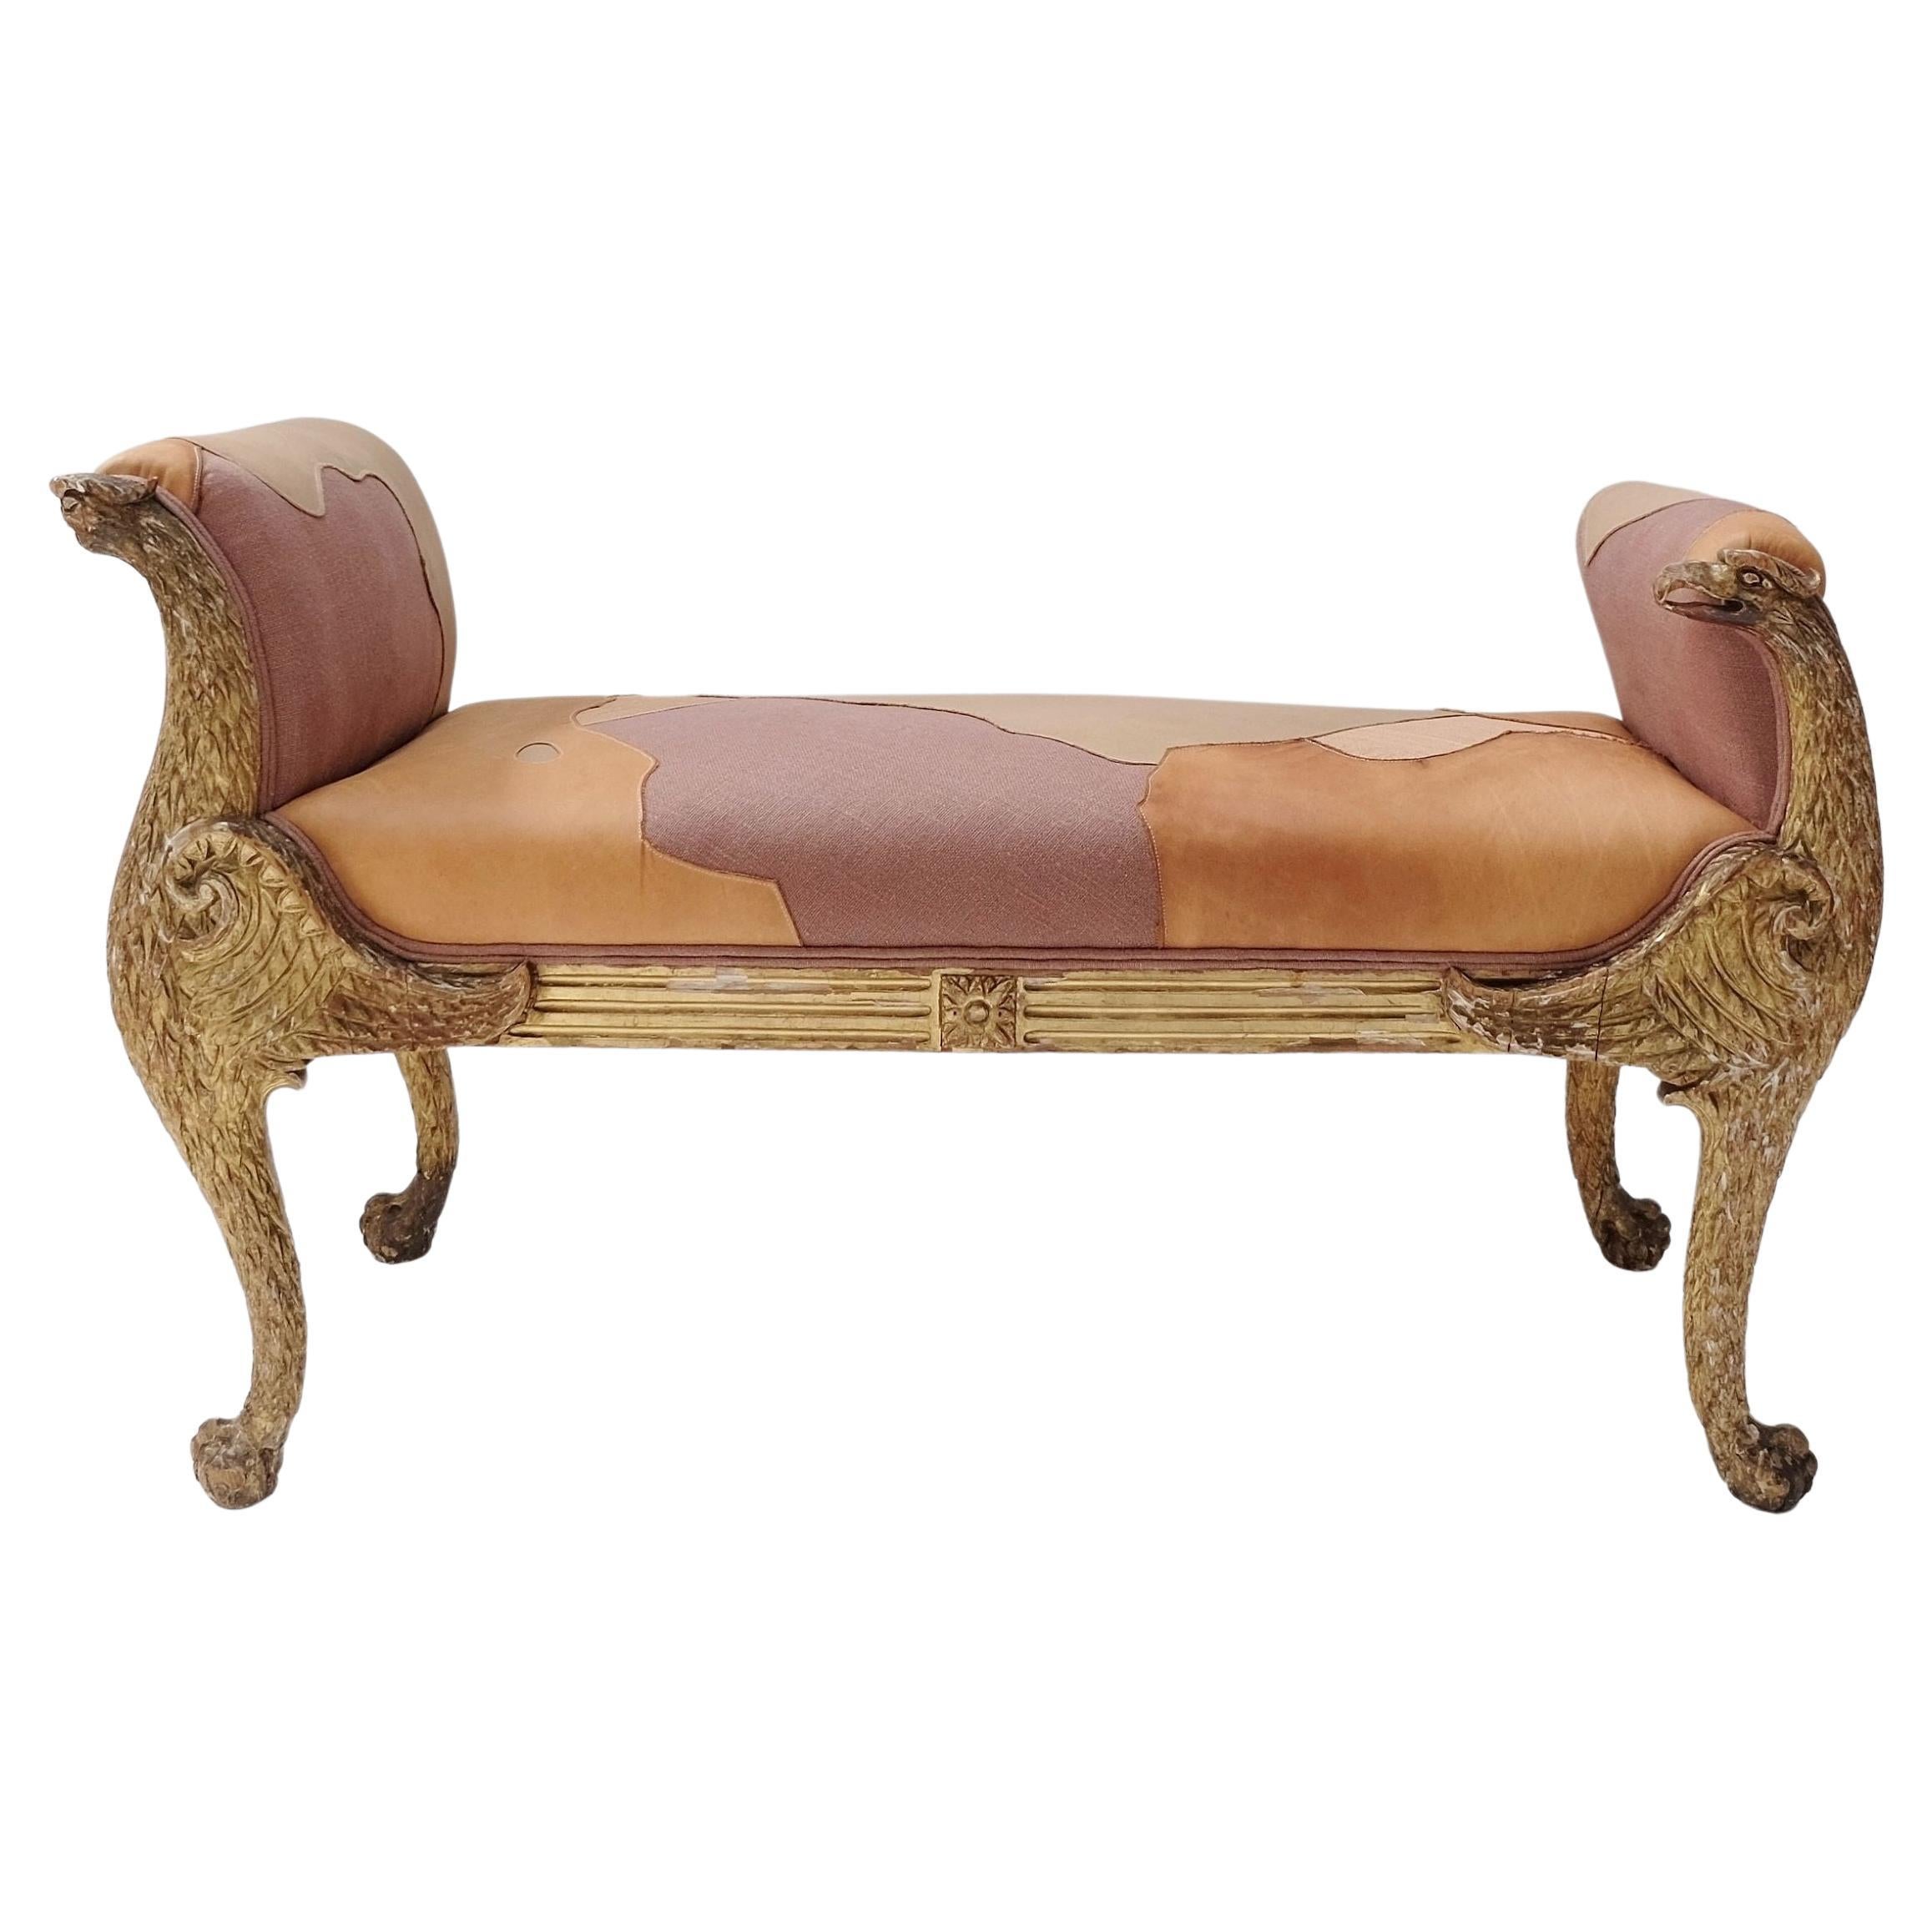 Antique Empire Style Gilded Scroll Arm Window Bench with Winged Eagle Supports